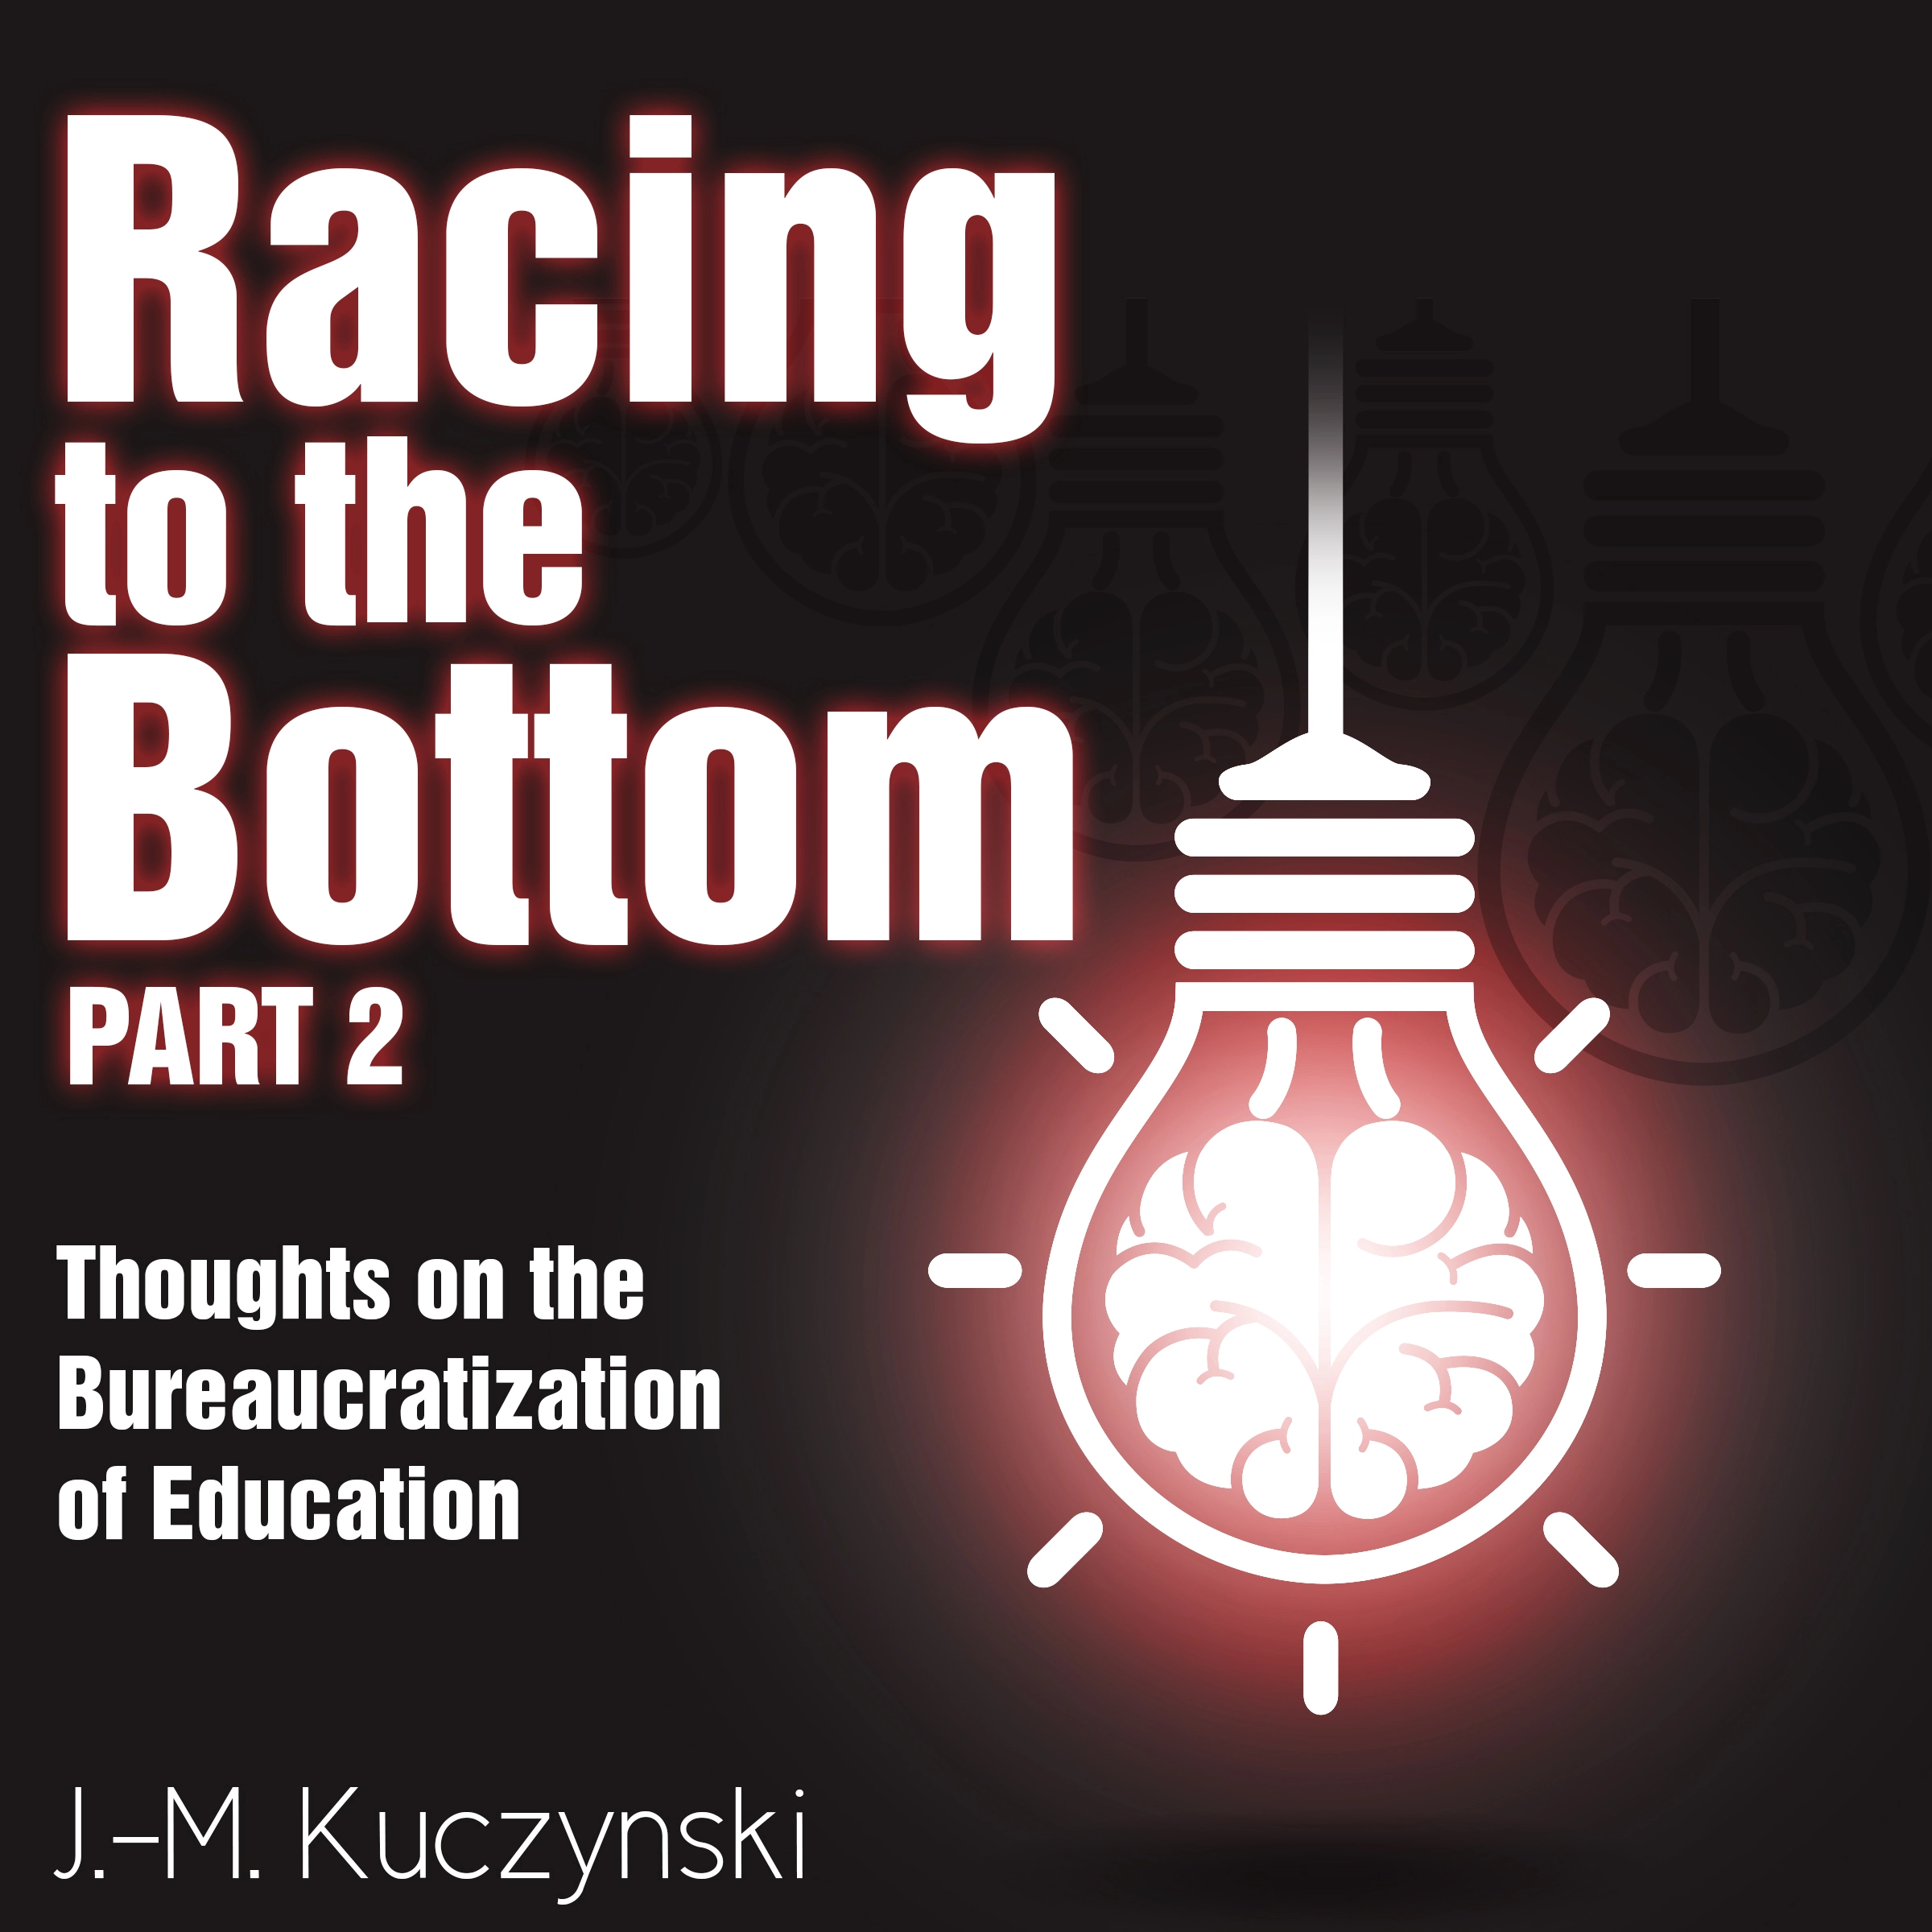 Racing to the Bottom Part 2: Thoughts on the Bureaucratization of Education Audiobook by J.-M. Kuczynski